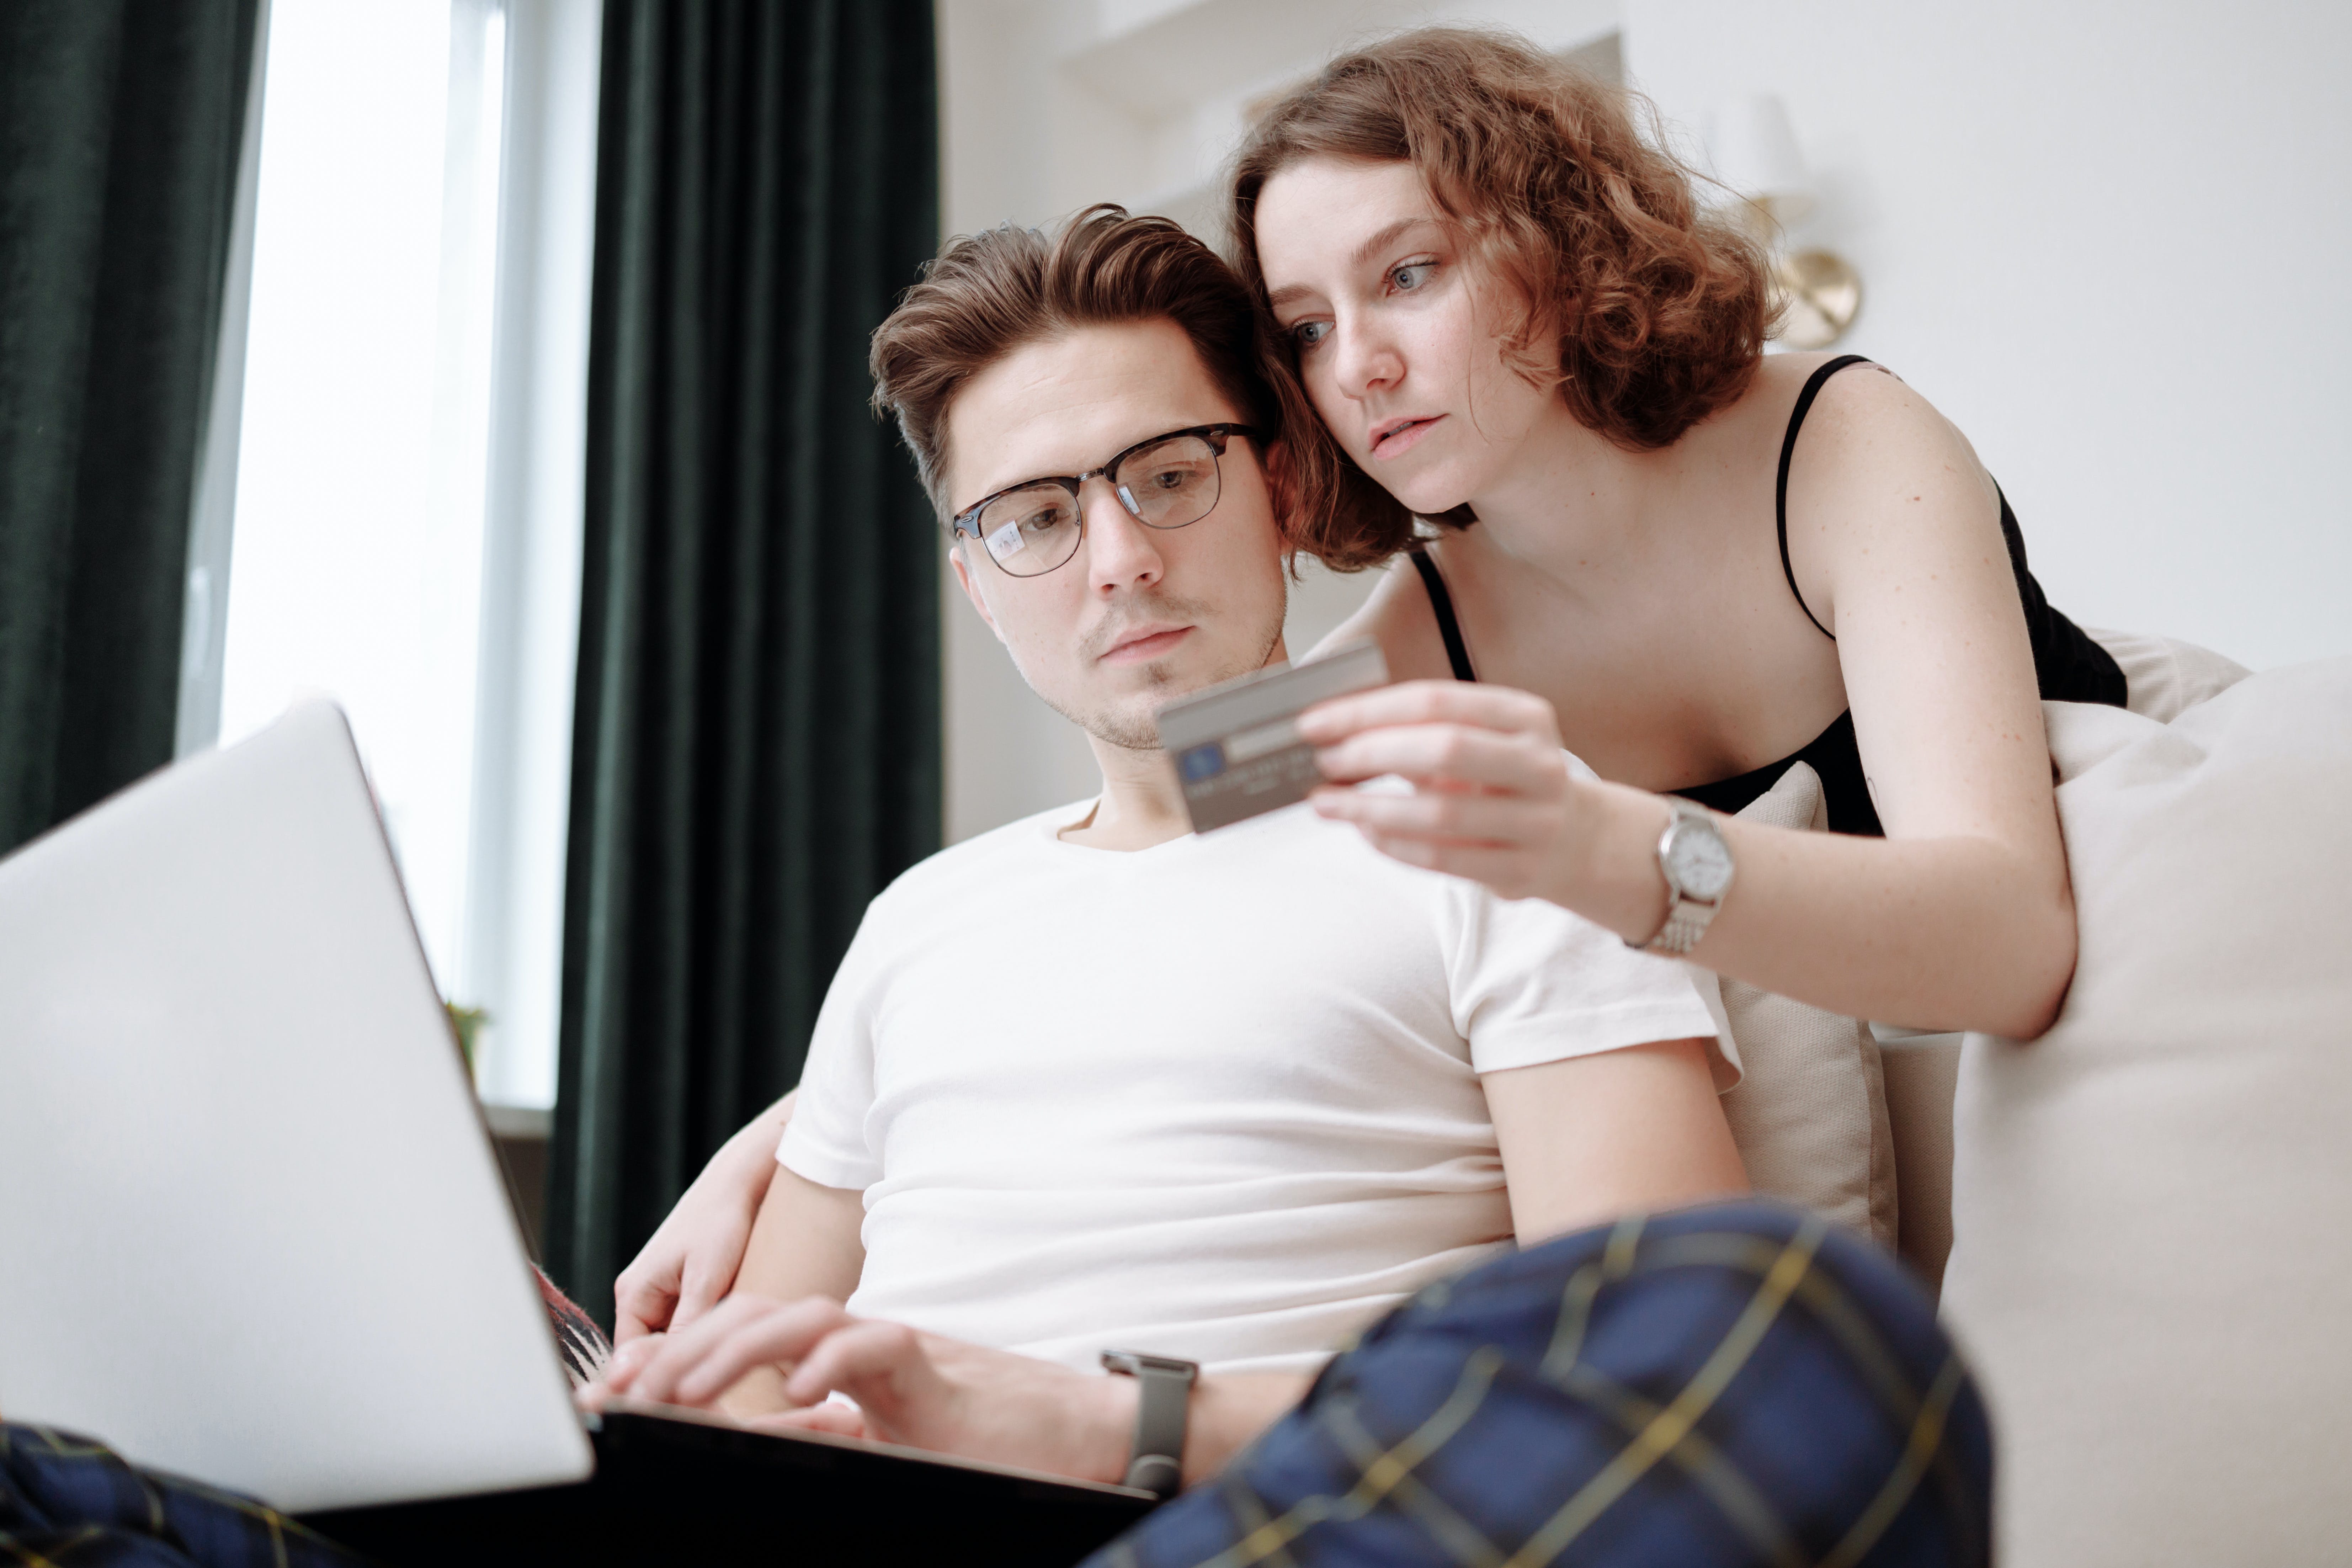 A man taking down card details show to him by his partner | Source: Pexels